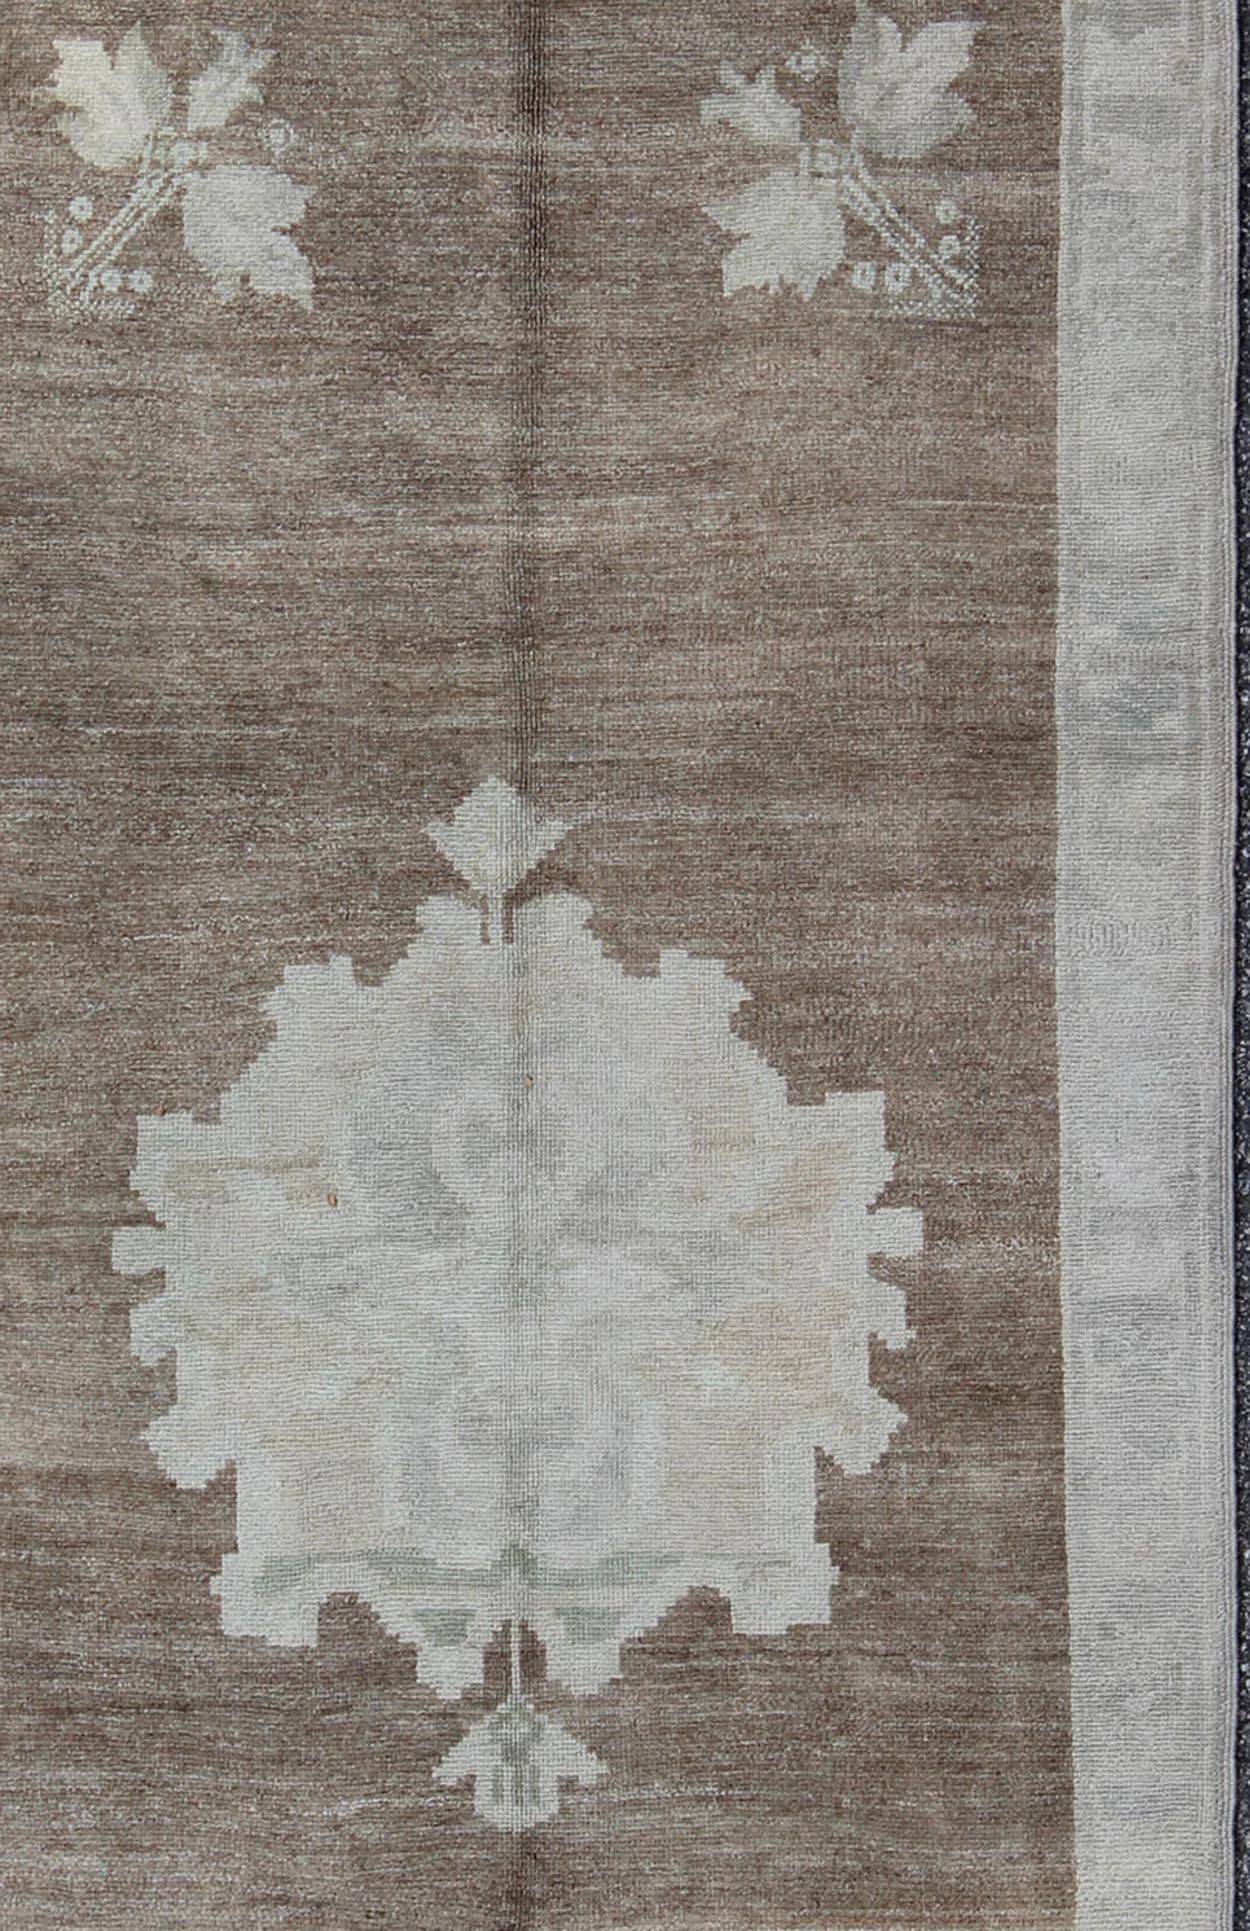 Vintage Turkish Oushak Rug with Floral Cornices in Light Brown, Gray and Cream In Good Condition For Sale In Atlanta, GA